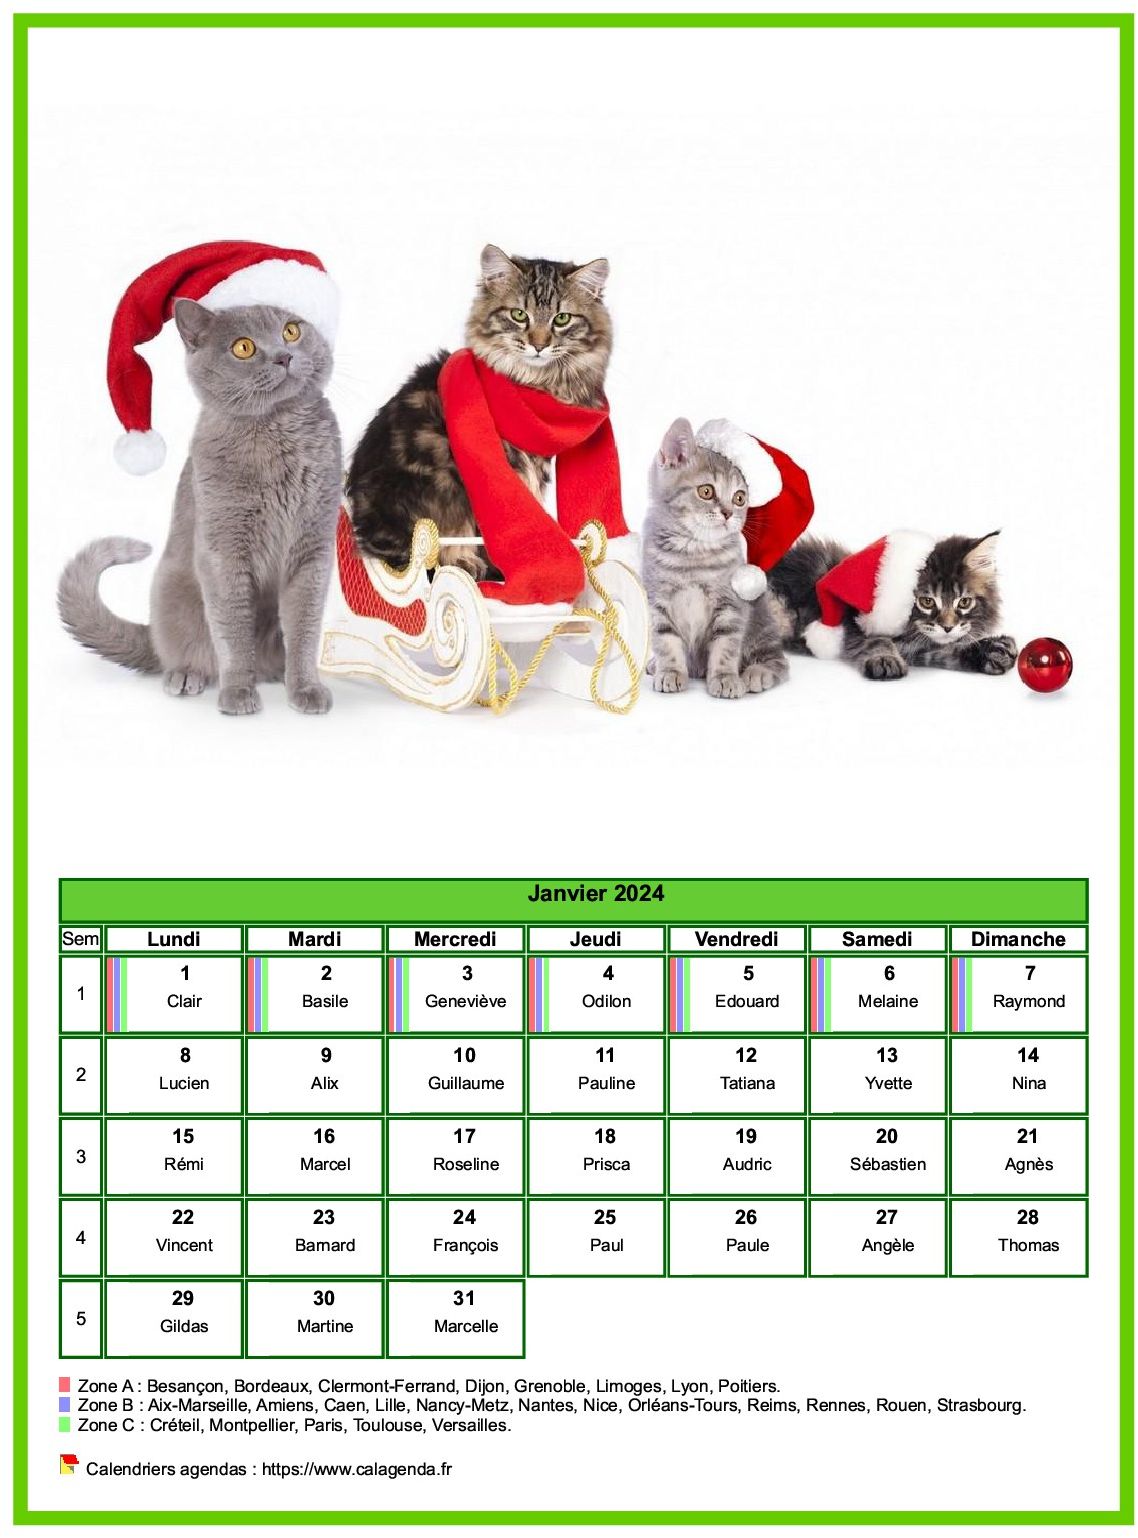 Calendrier janvier chats